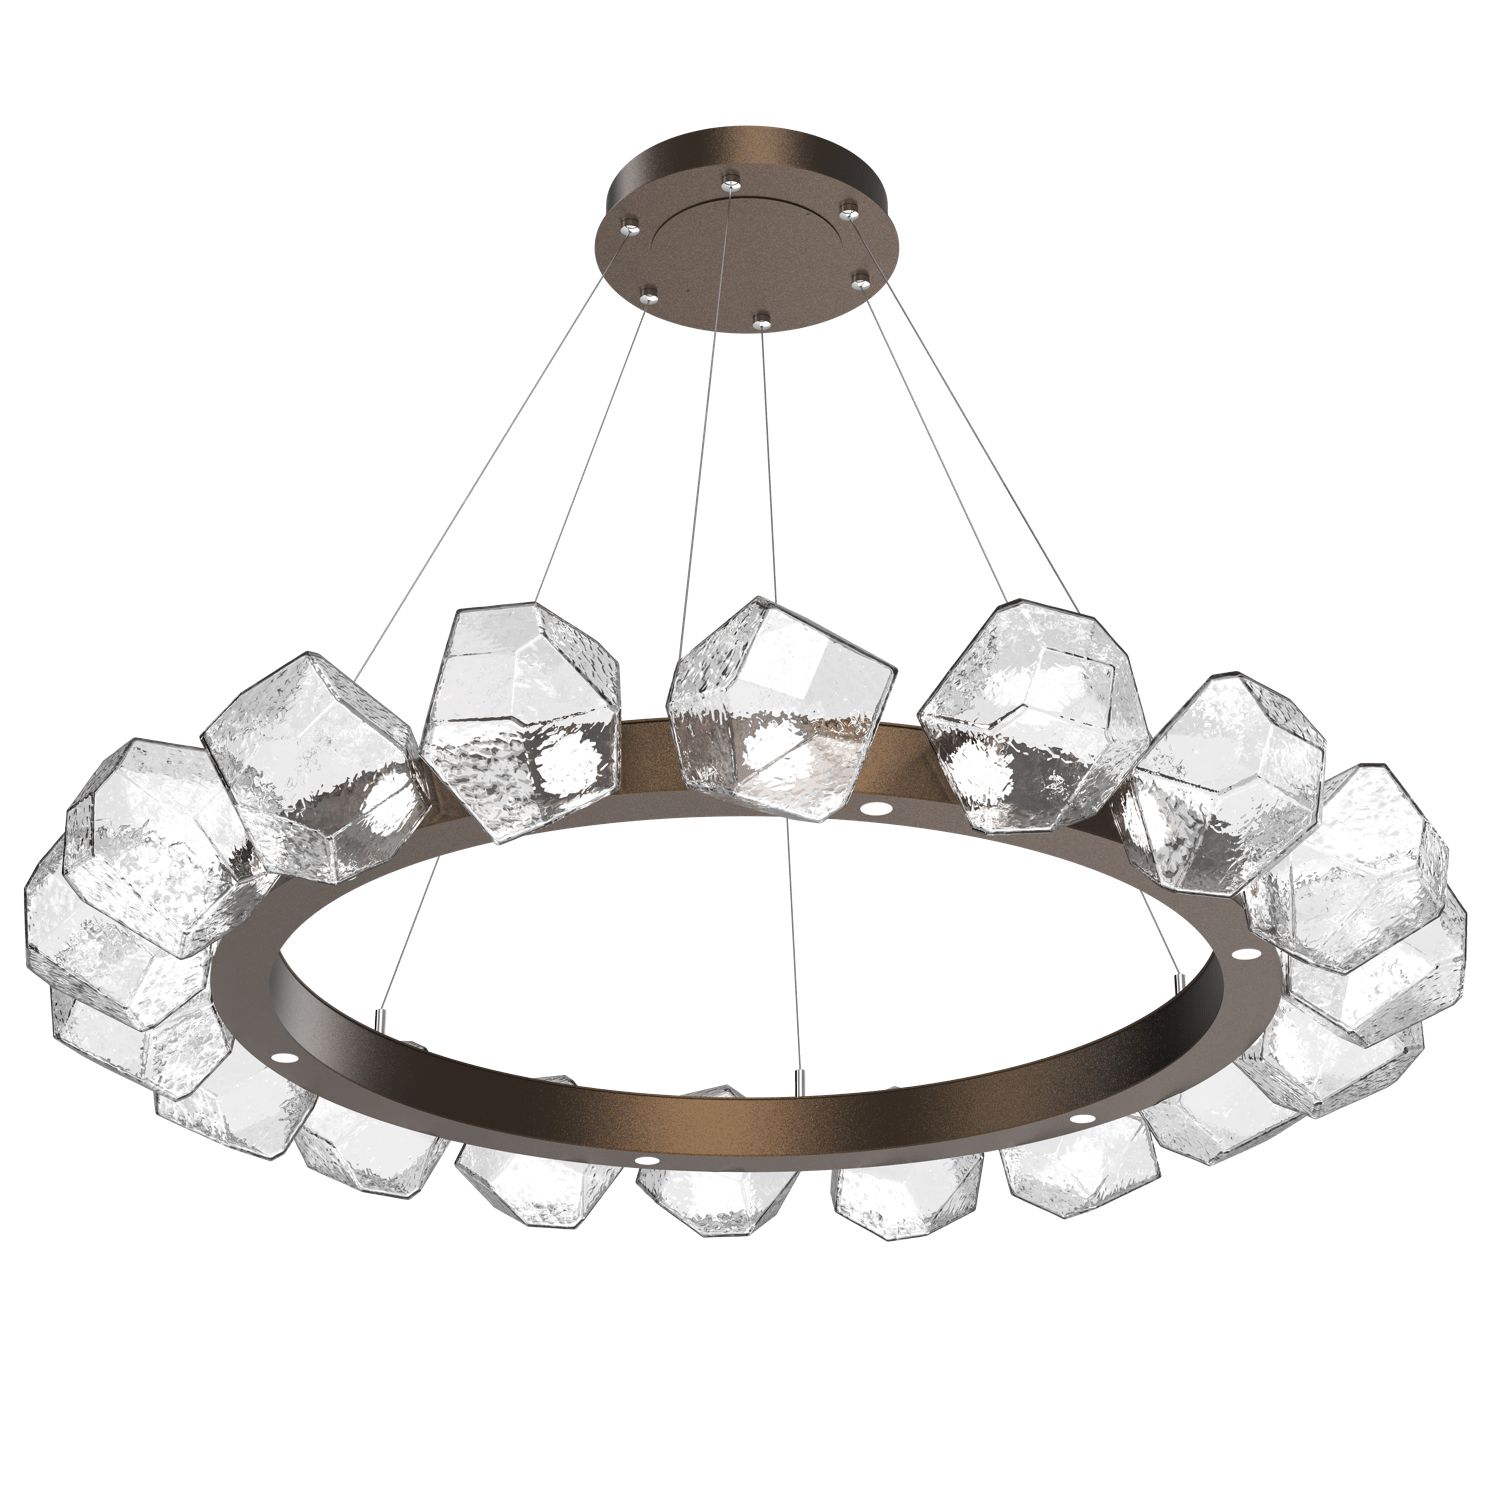 CHB0039-48-FB-C-Hammerton-Studio-Gem-48-inch-radial-ring-chandelier-with-flat-bronze-finish-and-clear-blown-glass-shades-and-LED-lamping